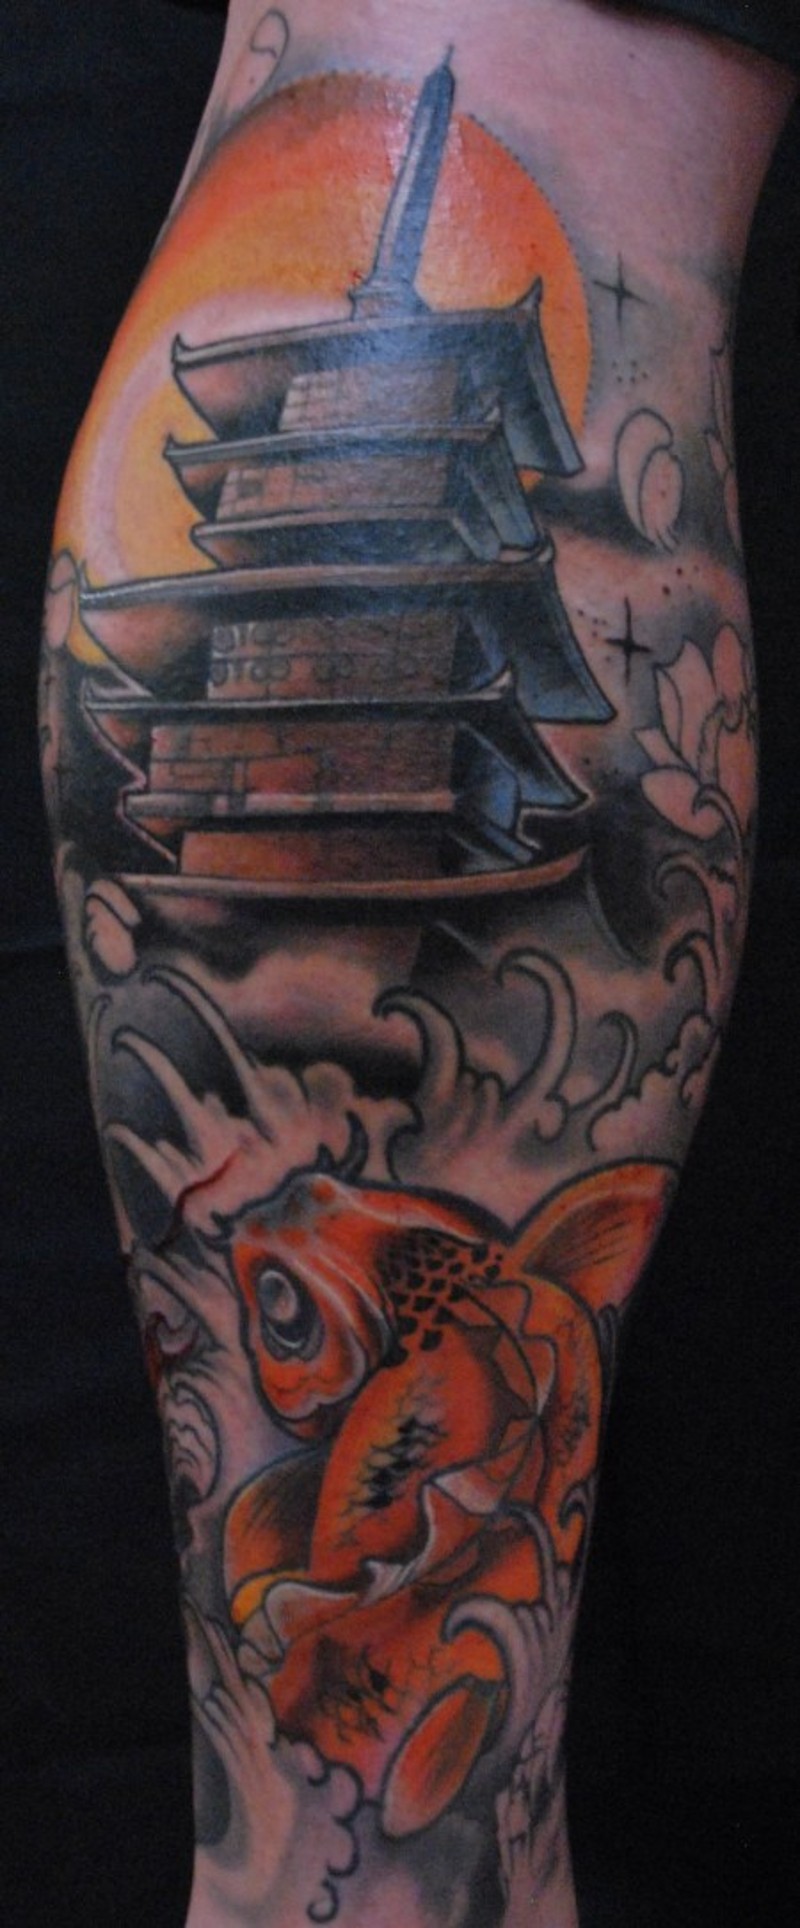 Comic books style colored big Asian house tattoo on leg muscle with golden fish